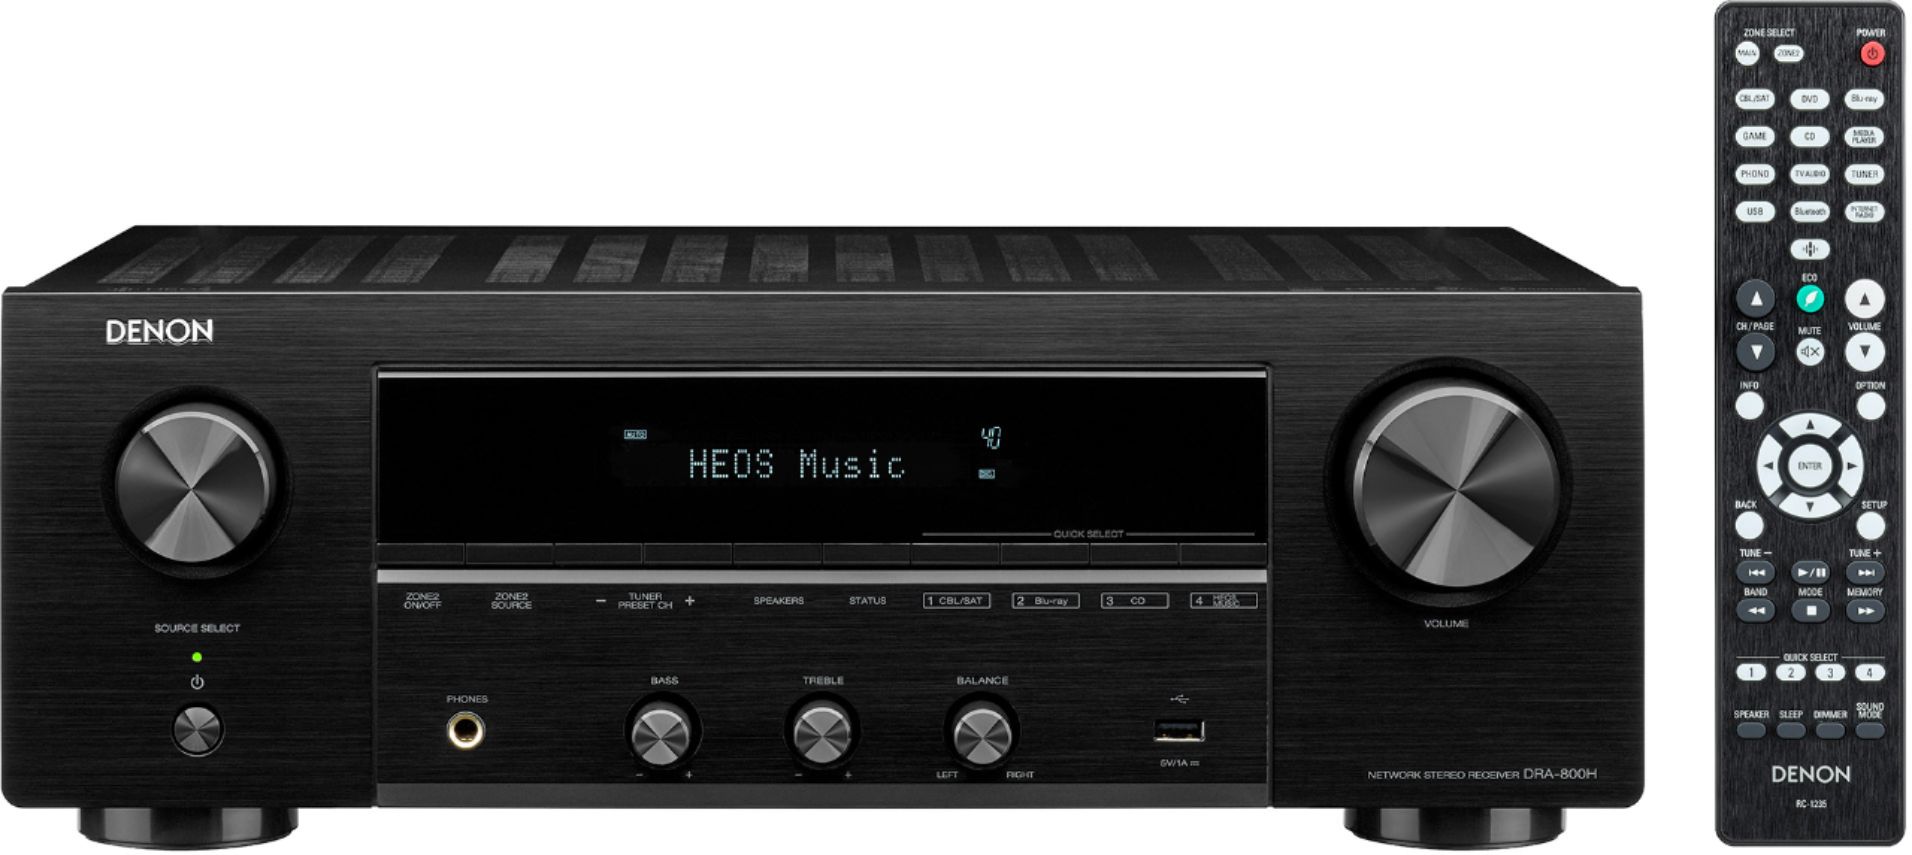 Denon DRA-800H 2-Channel Stereo Network Receiver for Home Theater | Hi-Fi Amplification | to Audio Black DRA-800H - Best Buy